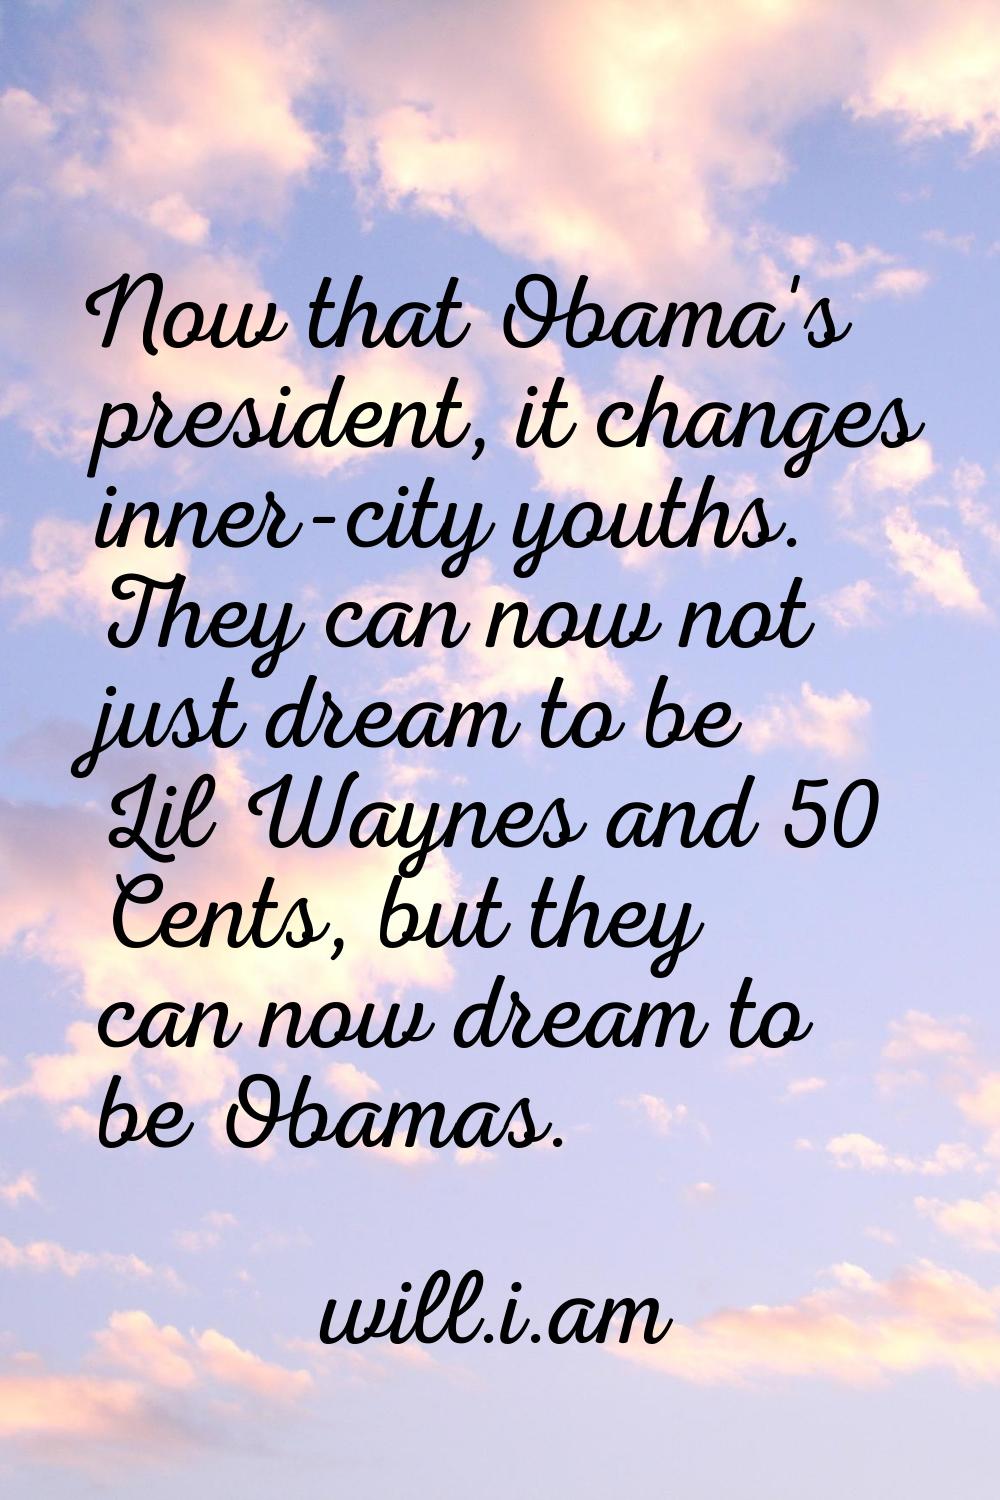 Now that Obama's president, it changes inner-city youths. They can now not just dream to be Lil Way